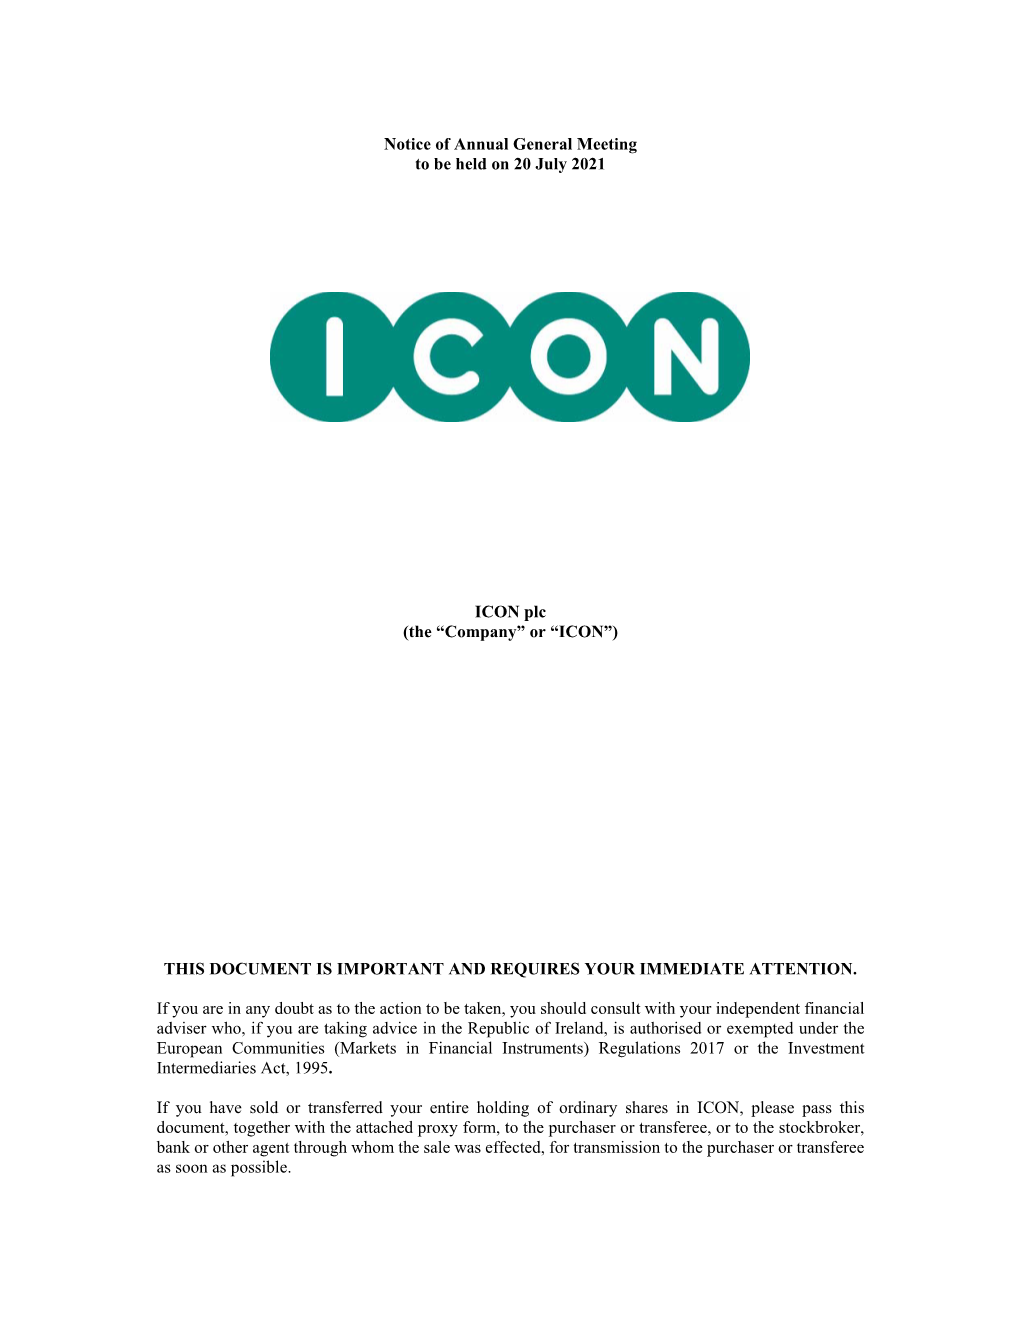 Notice of Annual General Meeting to Be Held on 20 July 2021 ICON